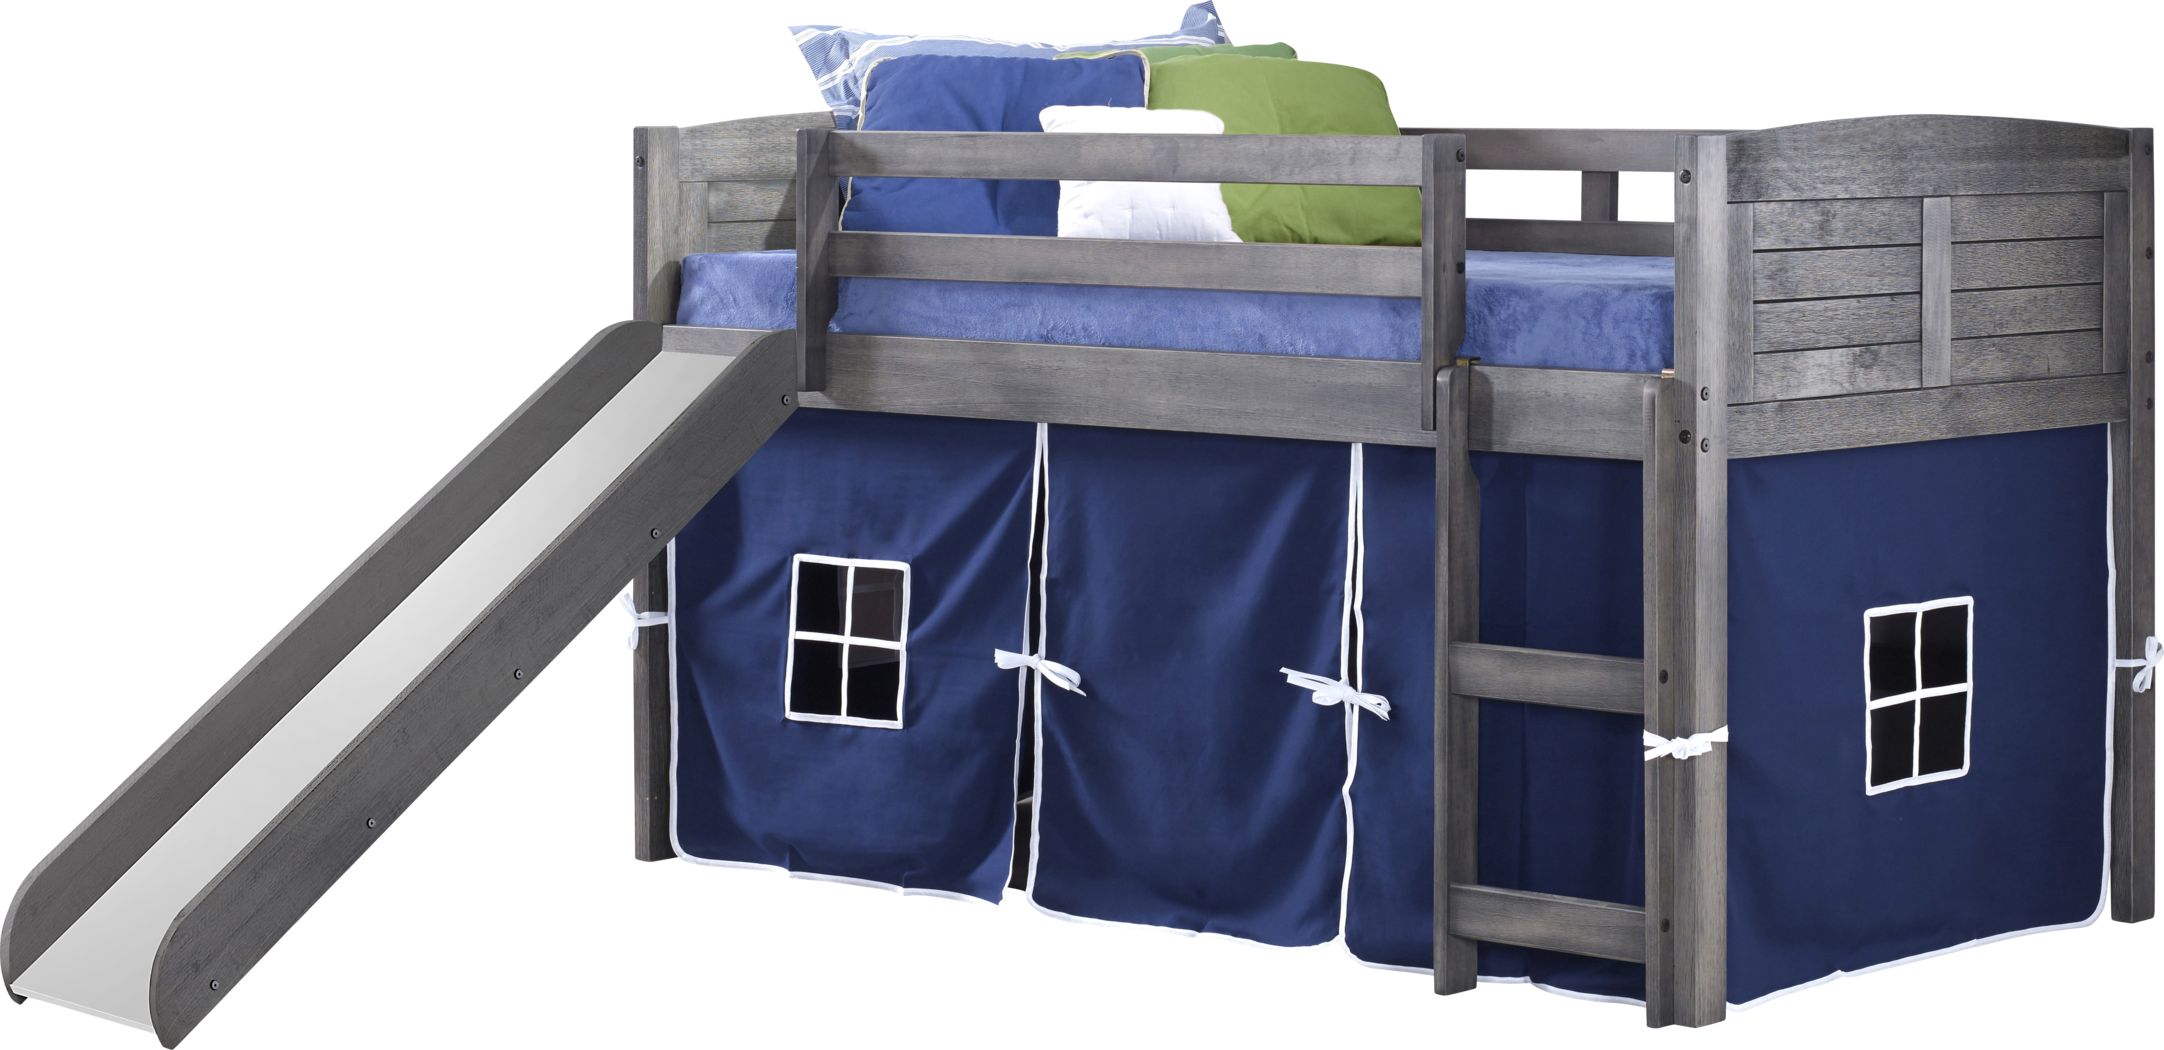 Bunk Beds For Kids, Basketball Bunk Bed